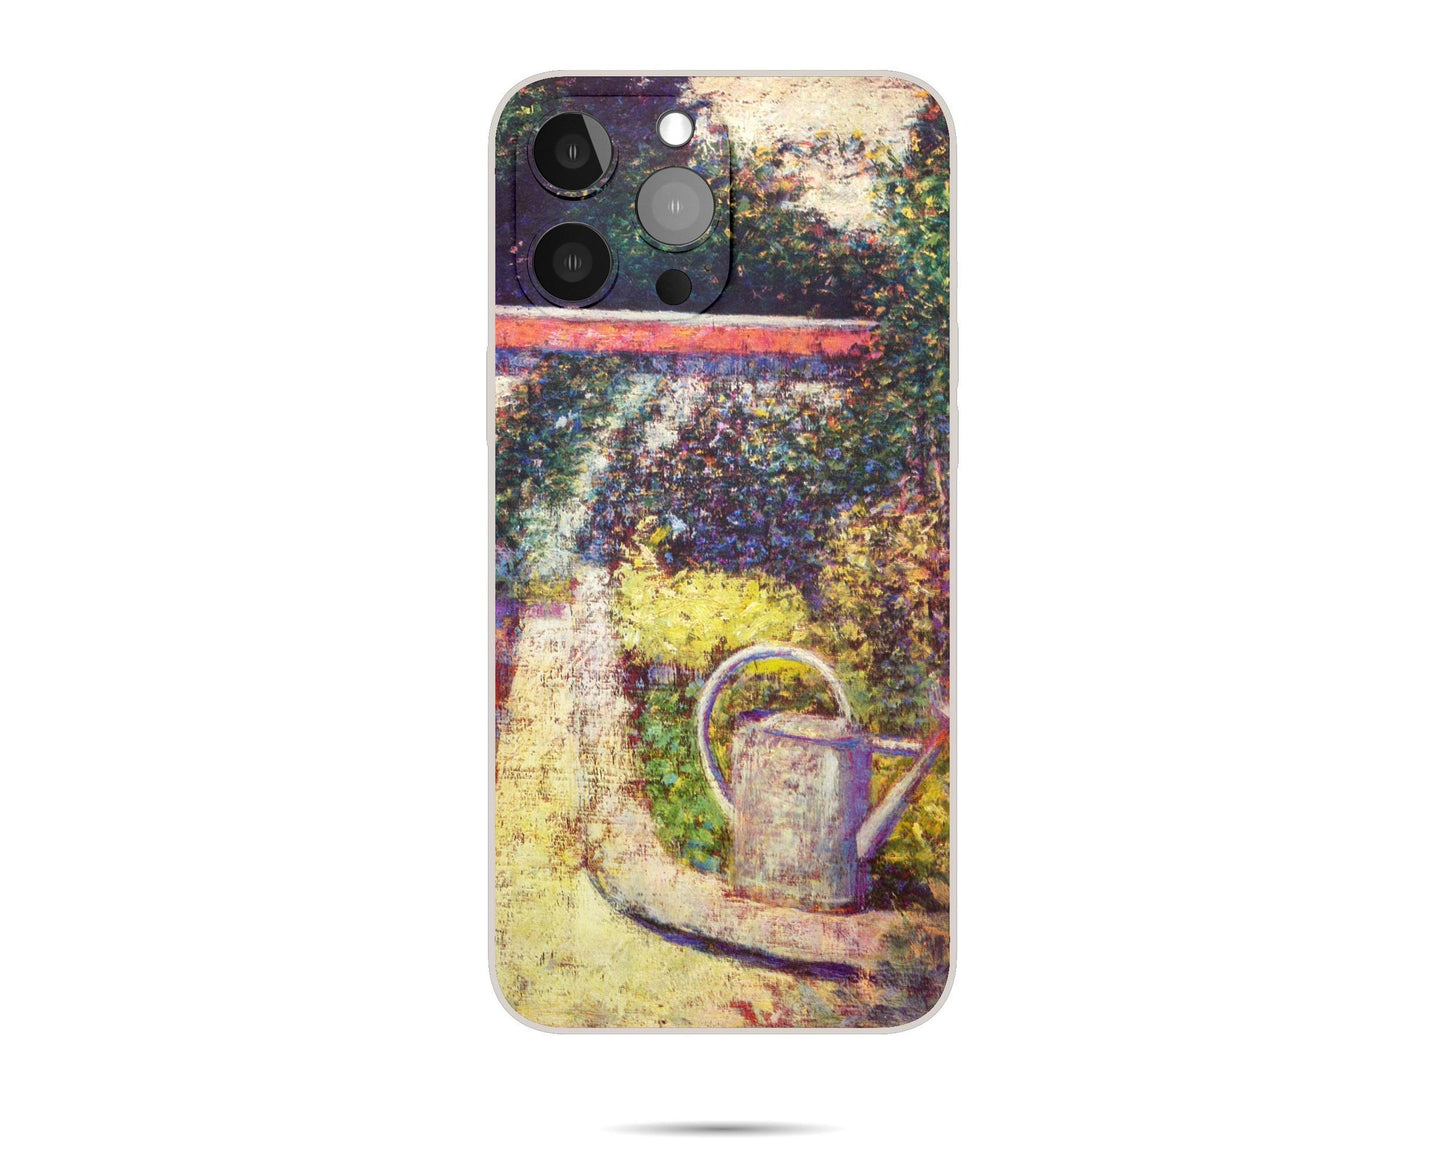 Iphone 14 Pro Max Case Of Georges Seura Famous Painting, Iphone 13 Pro Case, Iphone 7 Plus Case, Designer Iphone Case, Iphone Case Silicone